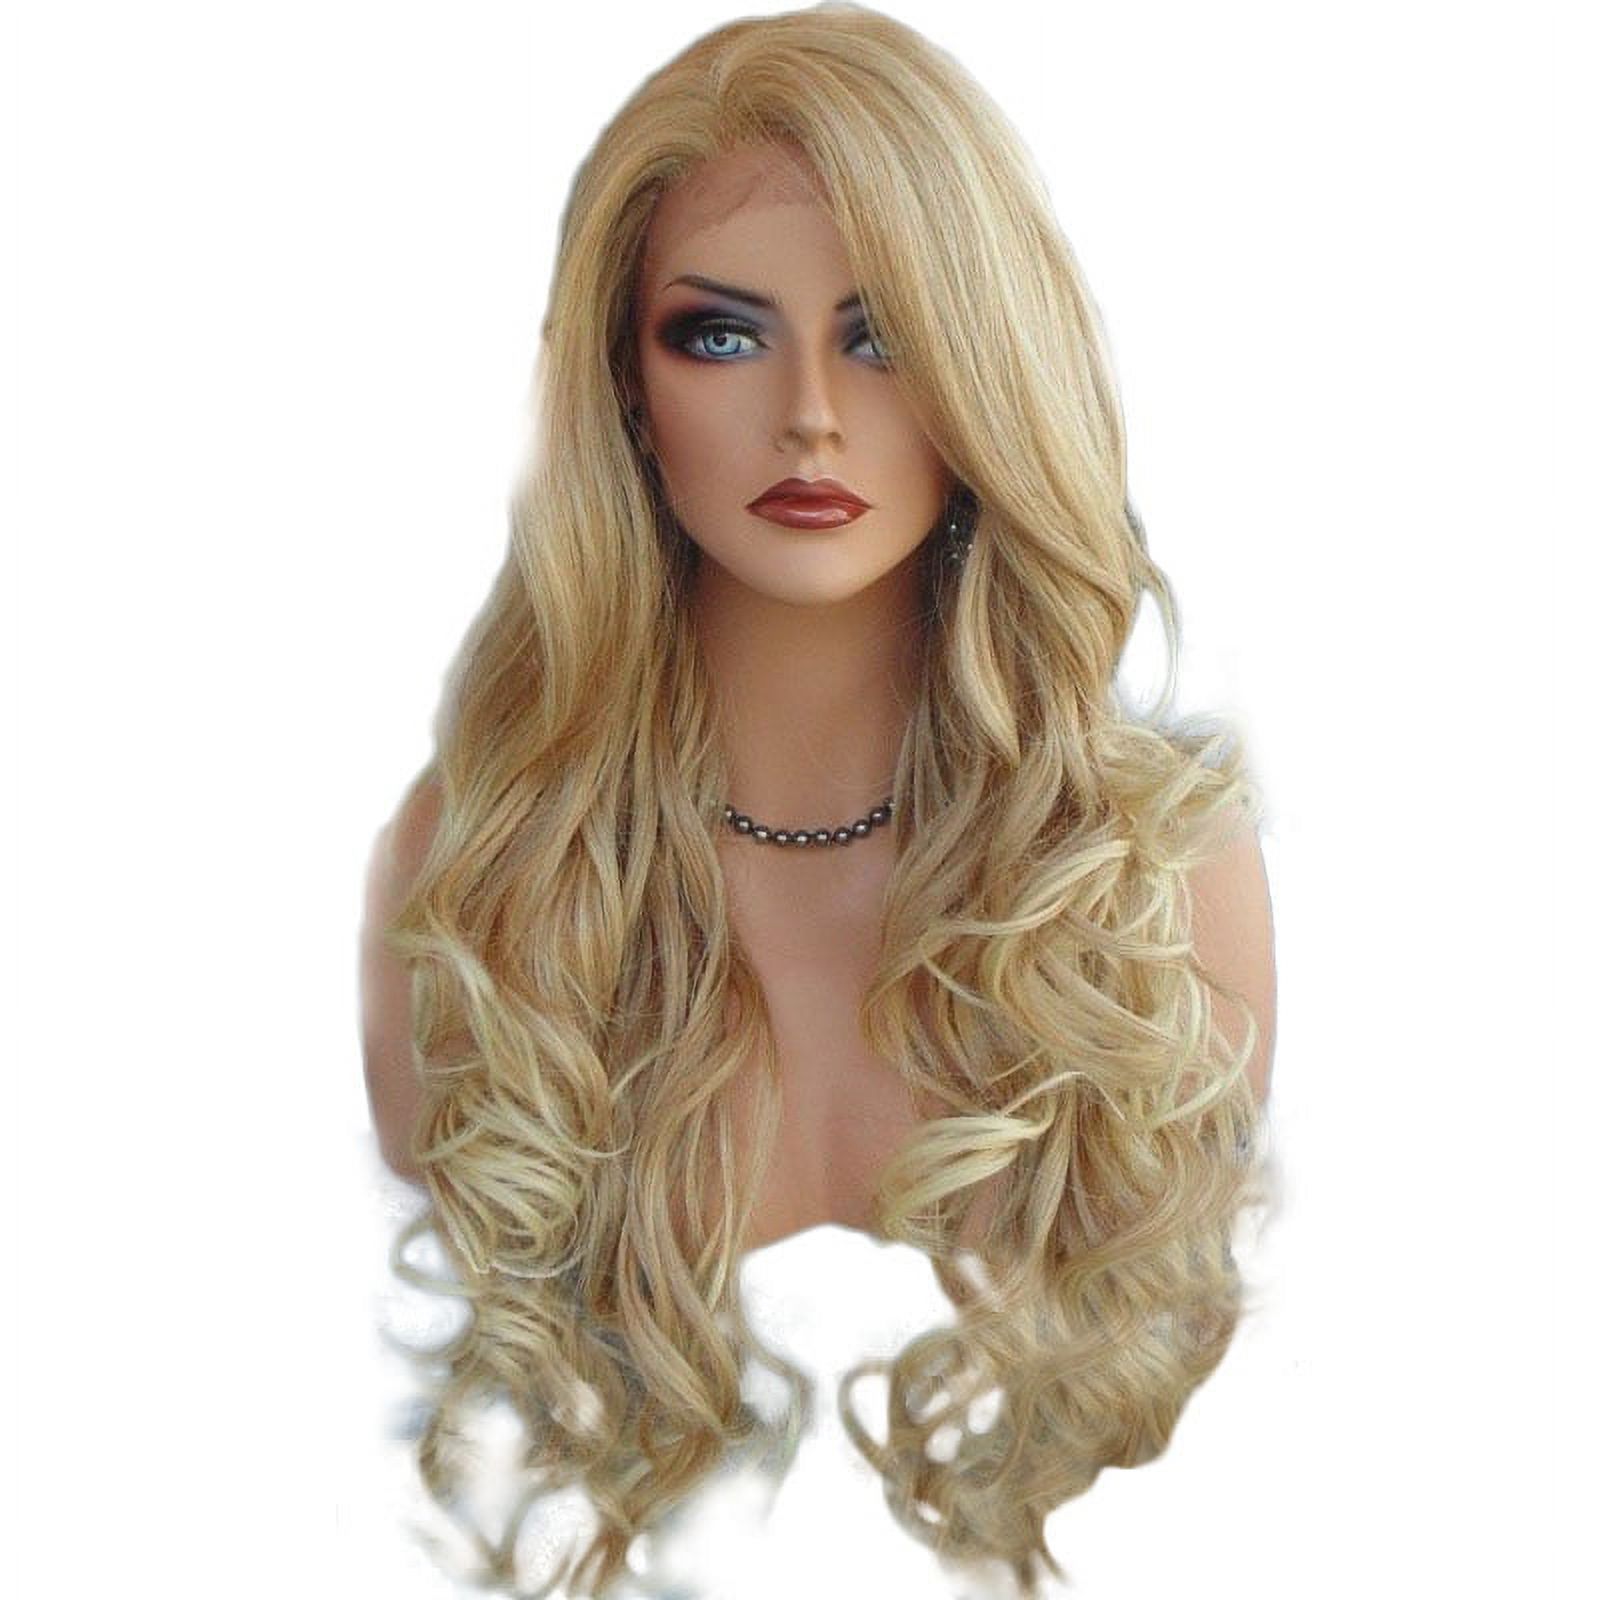 Hapeisy 70cm Long Front Lace Wig Heat Resistant Curly Hair Cosplay Wigs for Woman;70cm Long Front Lace Wig Heat Resistant Curly Hair Cosplay Wigs for Woman - image 1 of 6